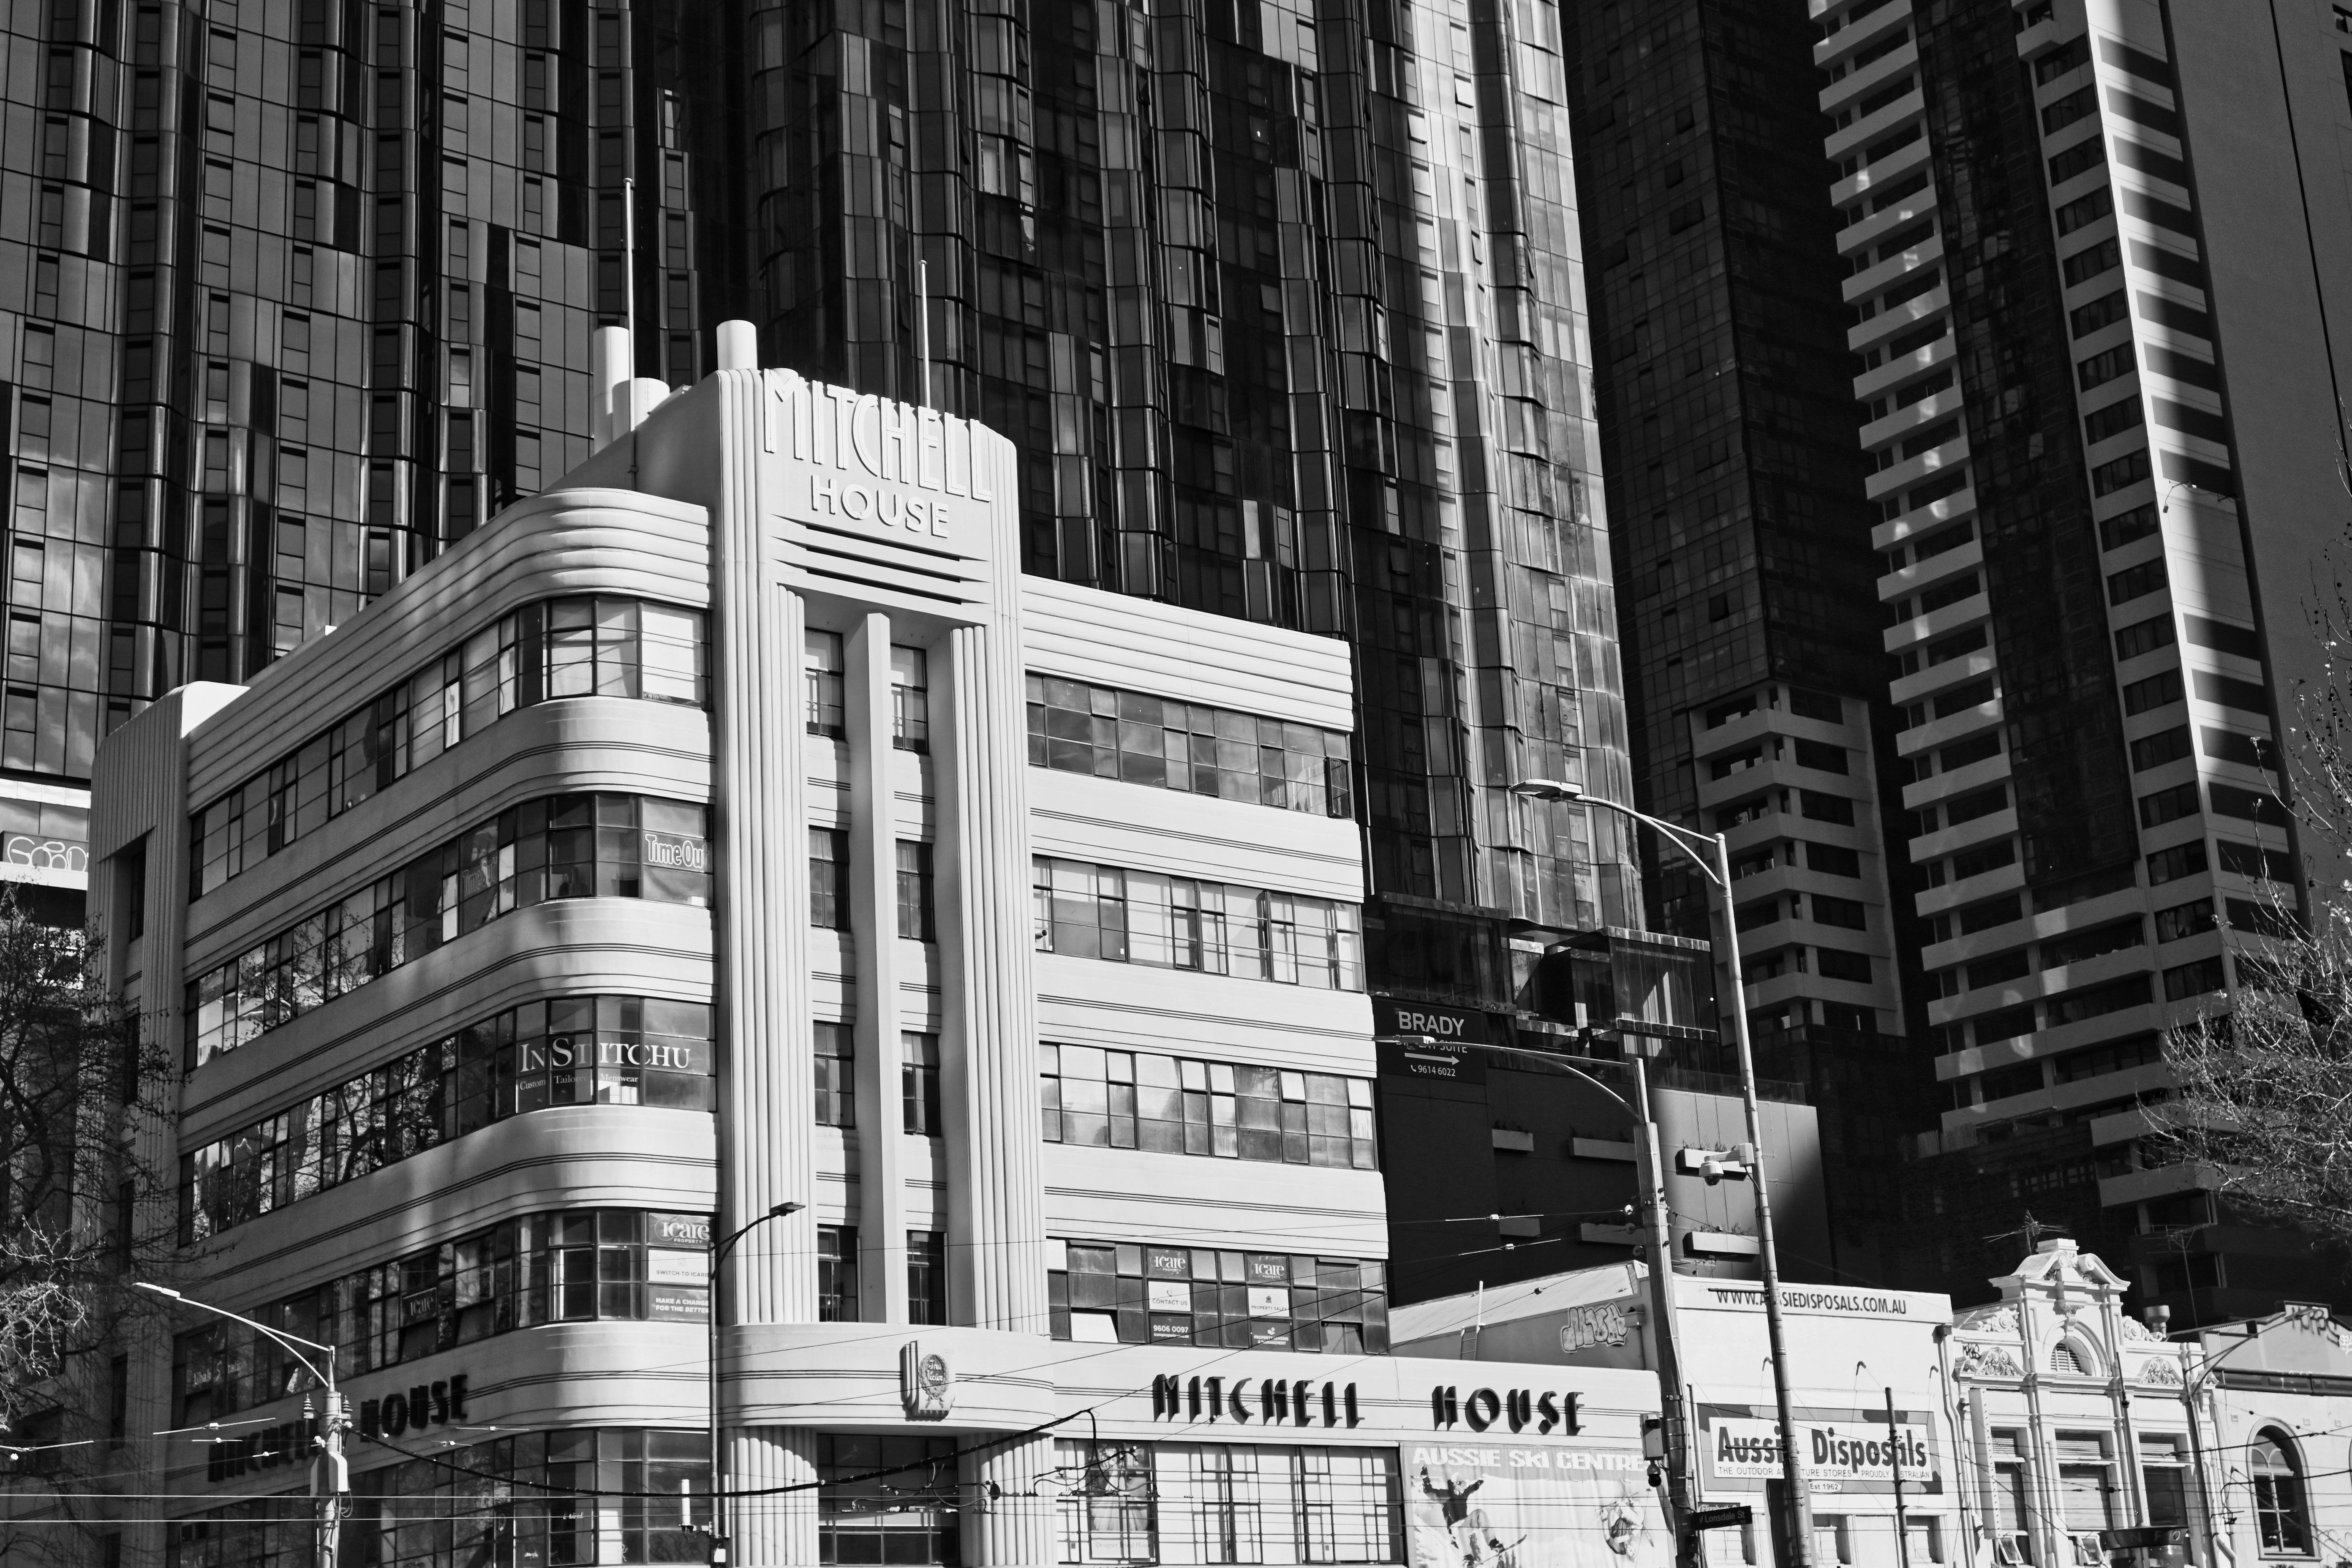 Mitchell House, built in the 1930s, with many new recent skyscrapers in the background